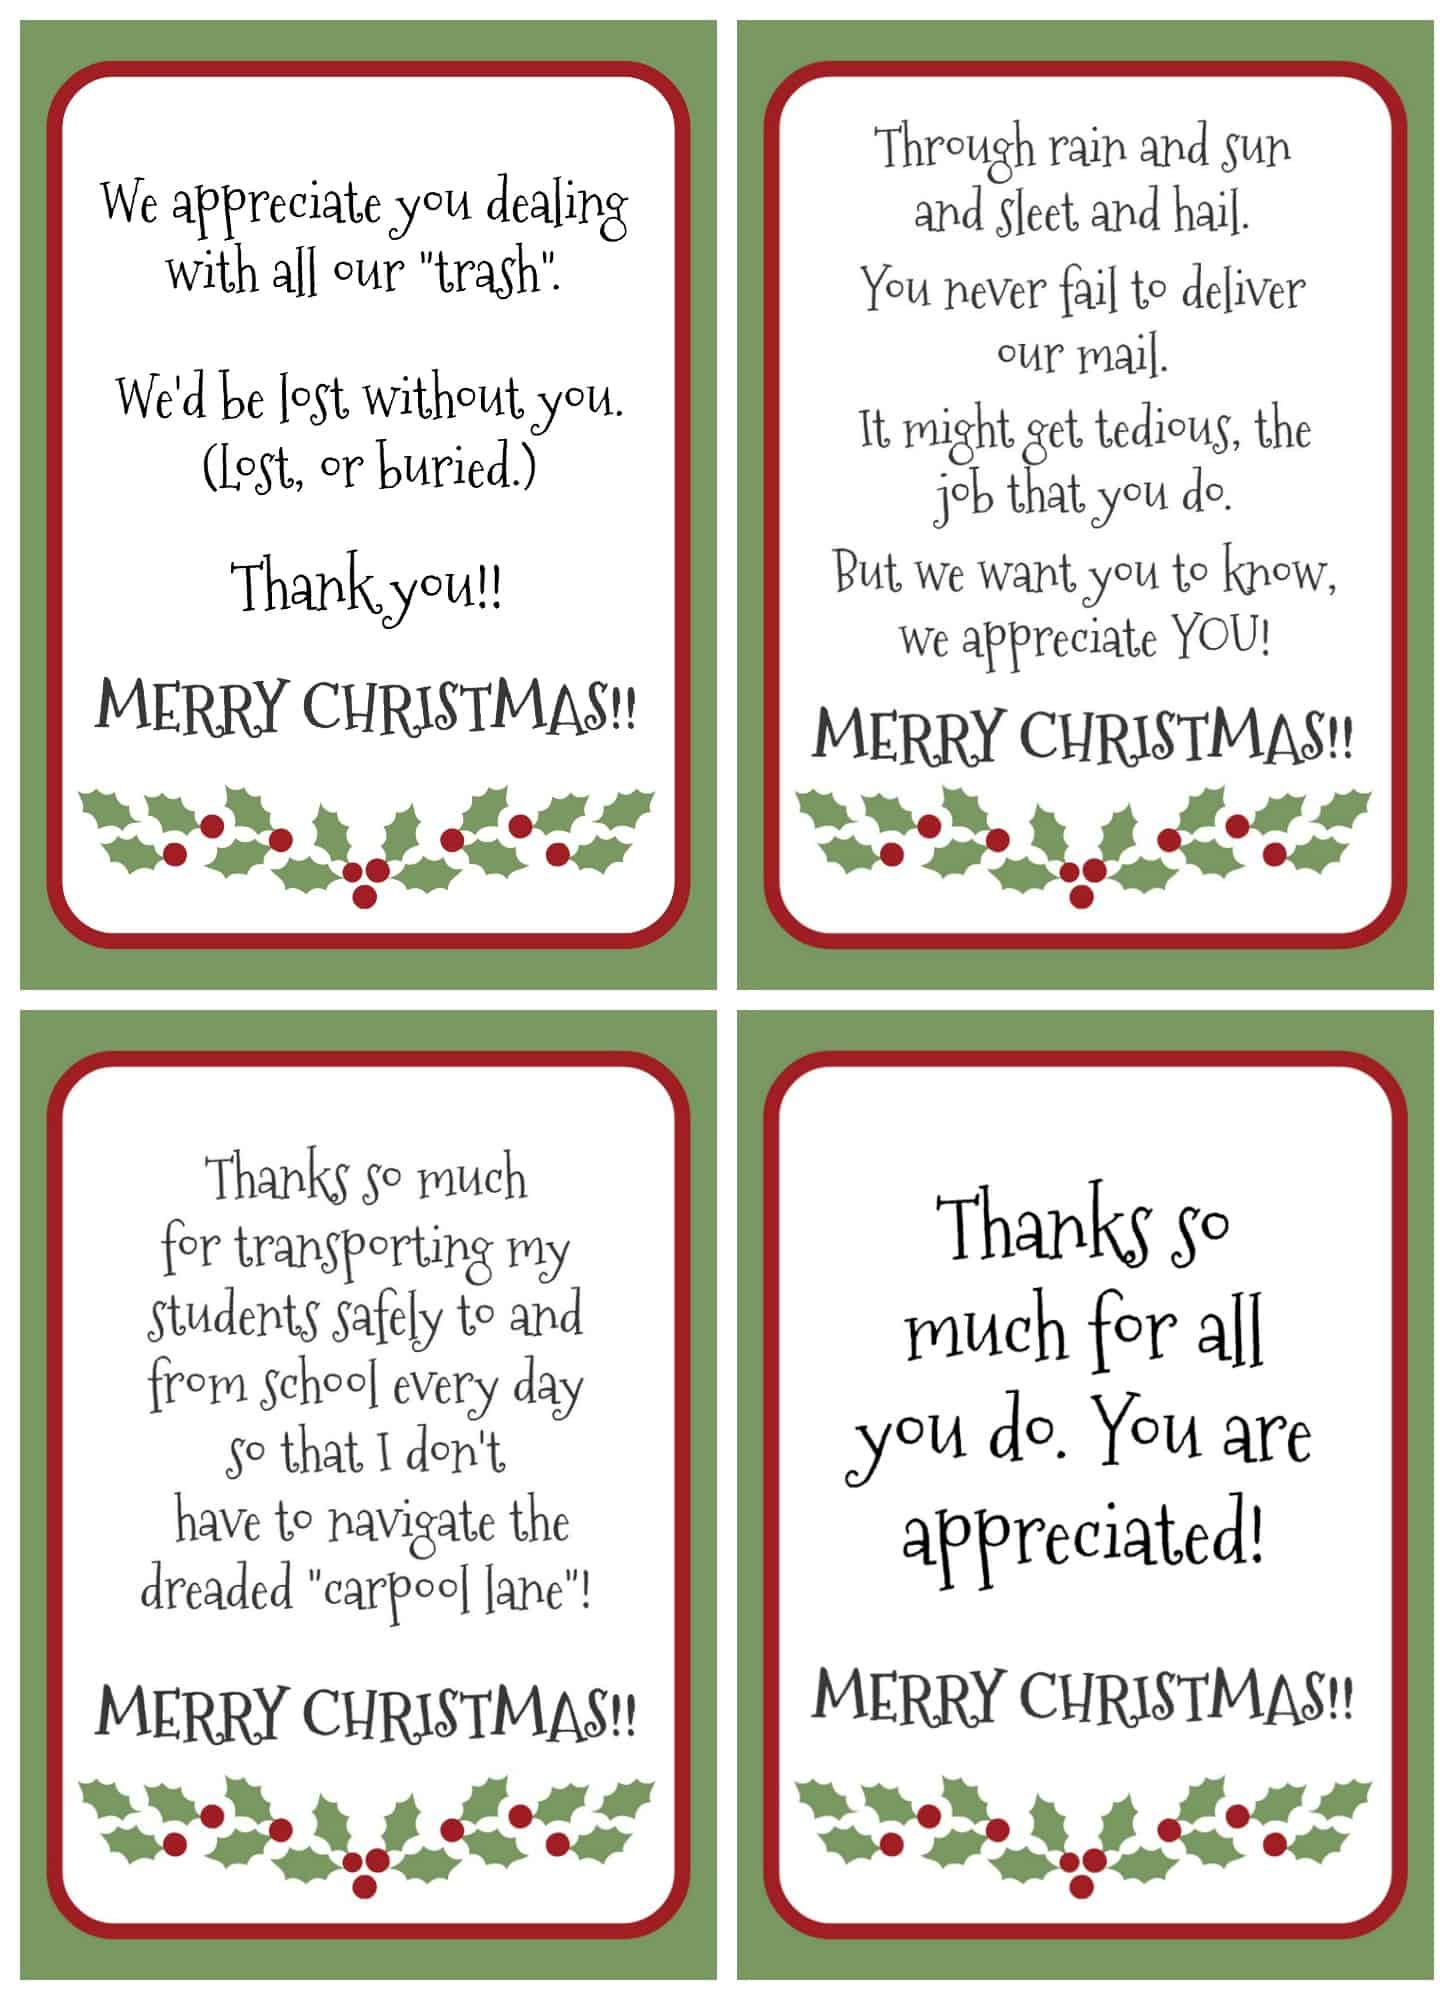 Bus Driver Thank You Gift Card [INSTANT DOWNLOAD] - My Store